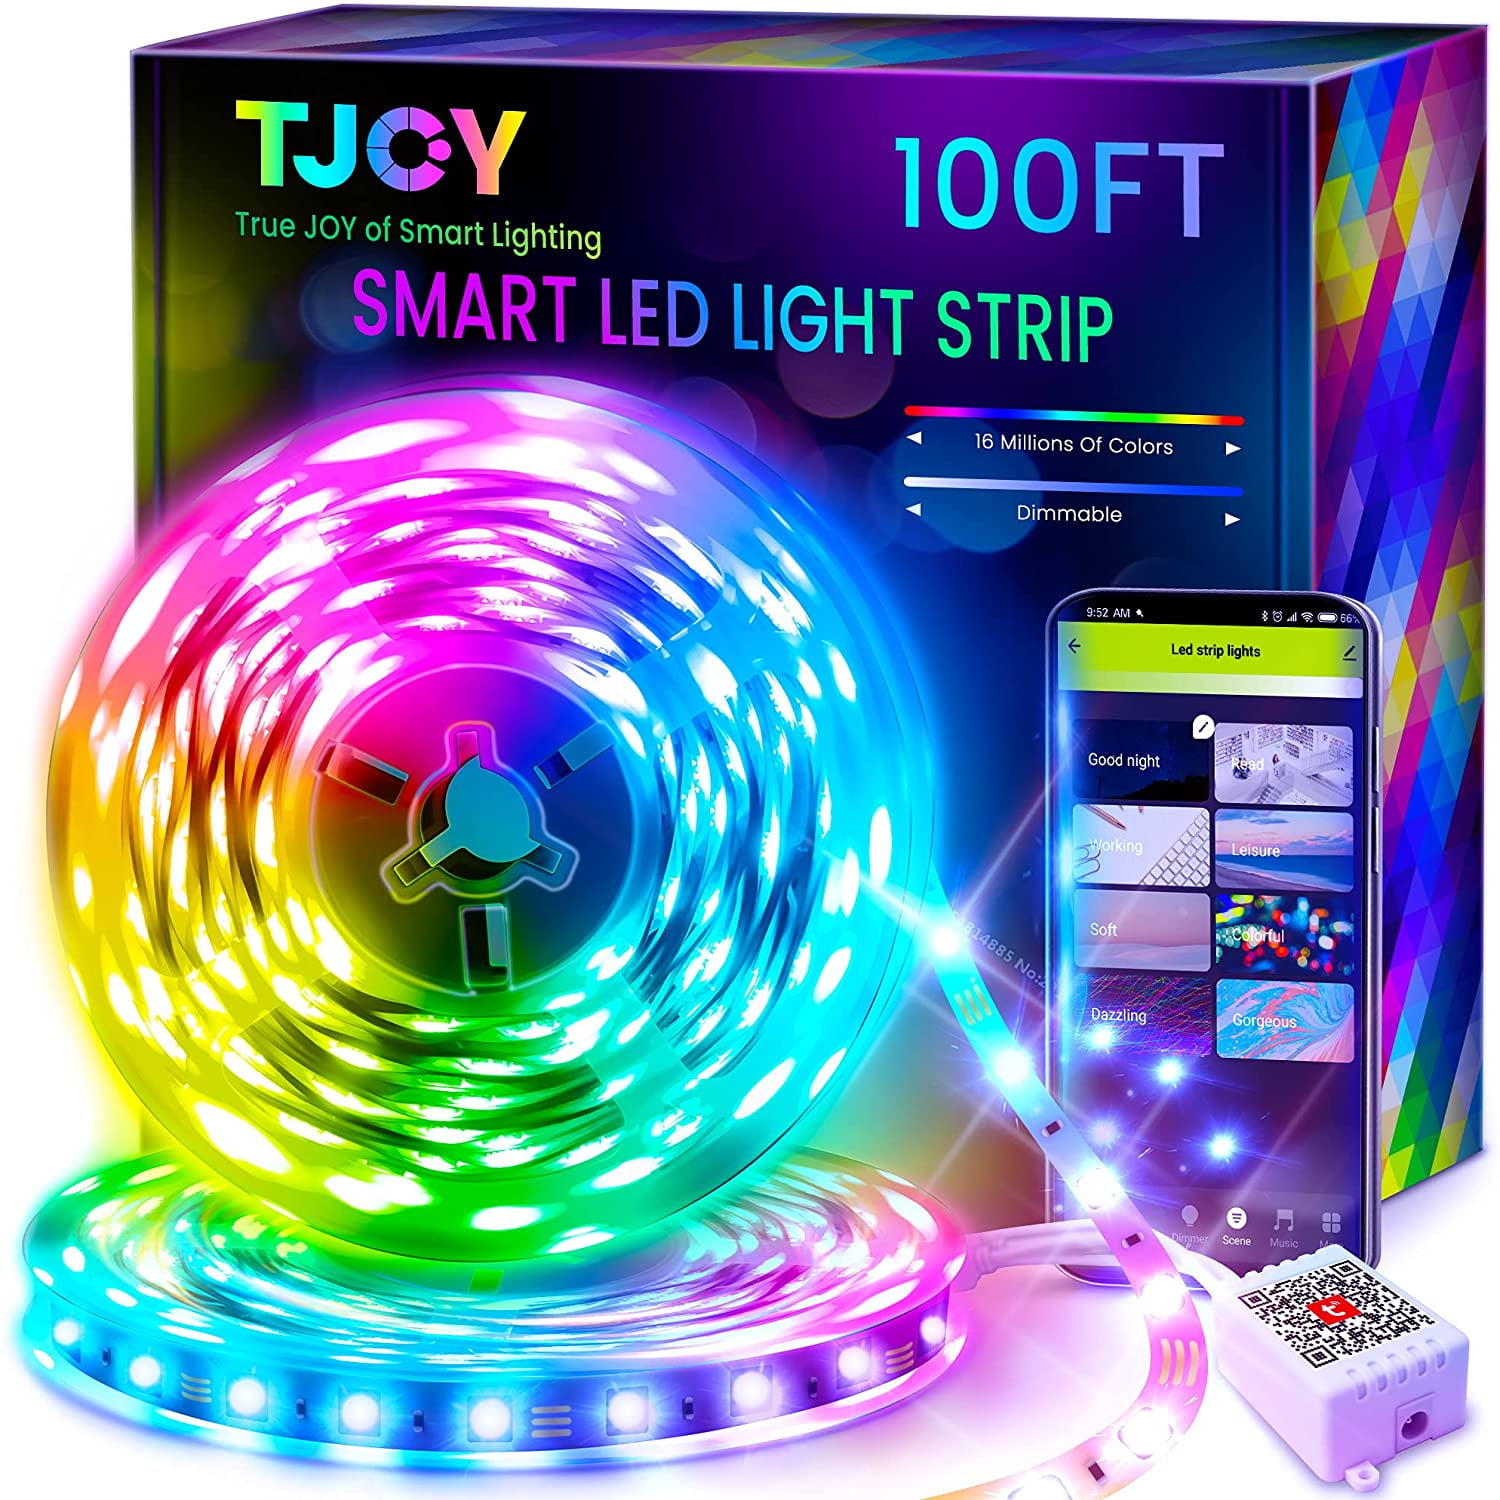  Tasmor Led Strip Lights Sync to Music, 65.6ft 5050 RGB Light  Color Changing with Music IP65 Waterproof LED Rope Light with Controller  for Home, Room, Bar, Party : Musical Instruments